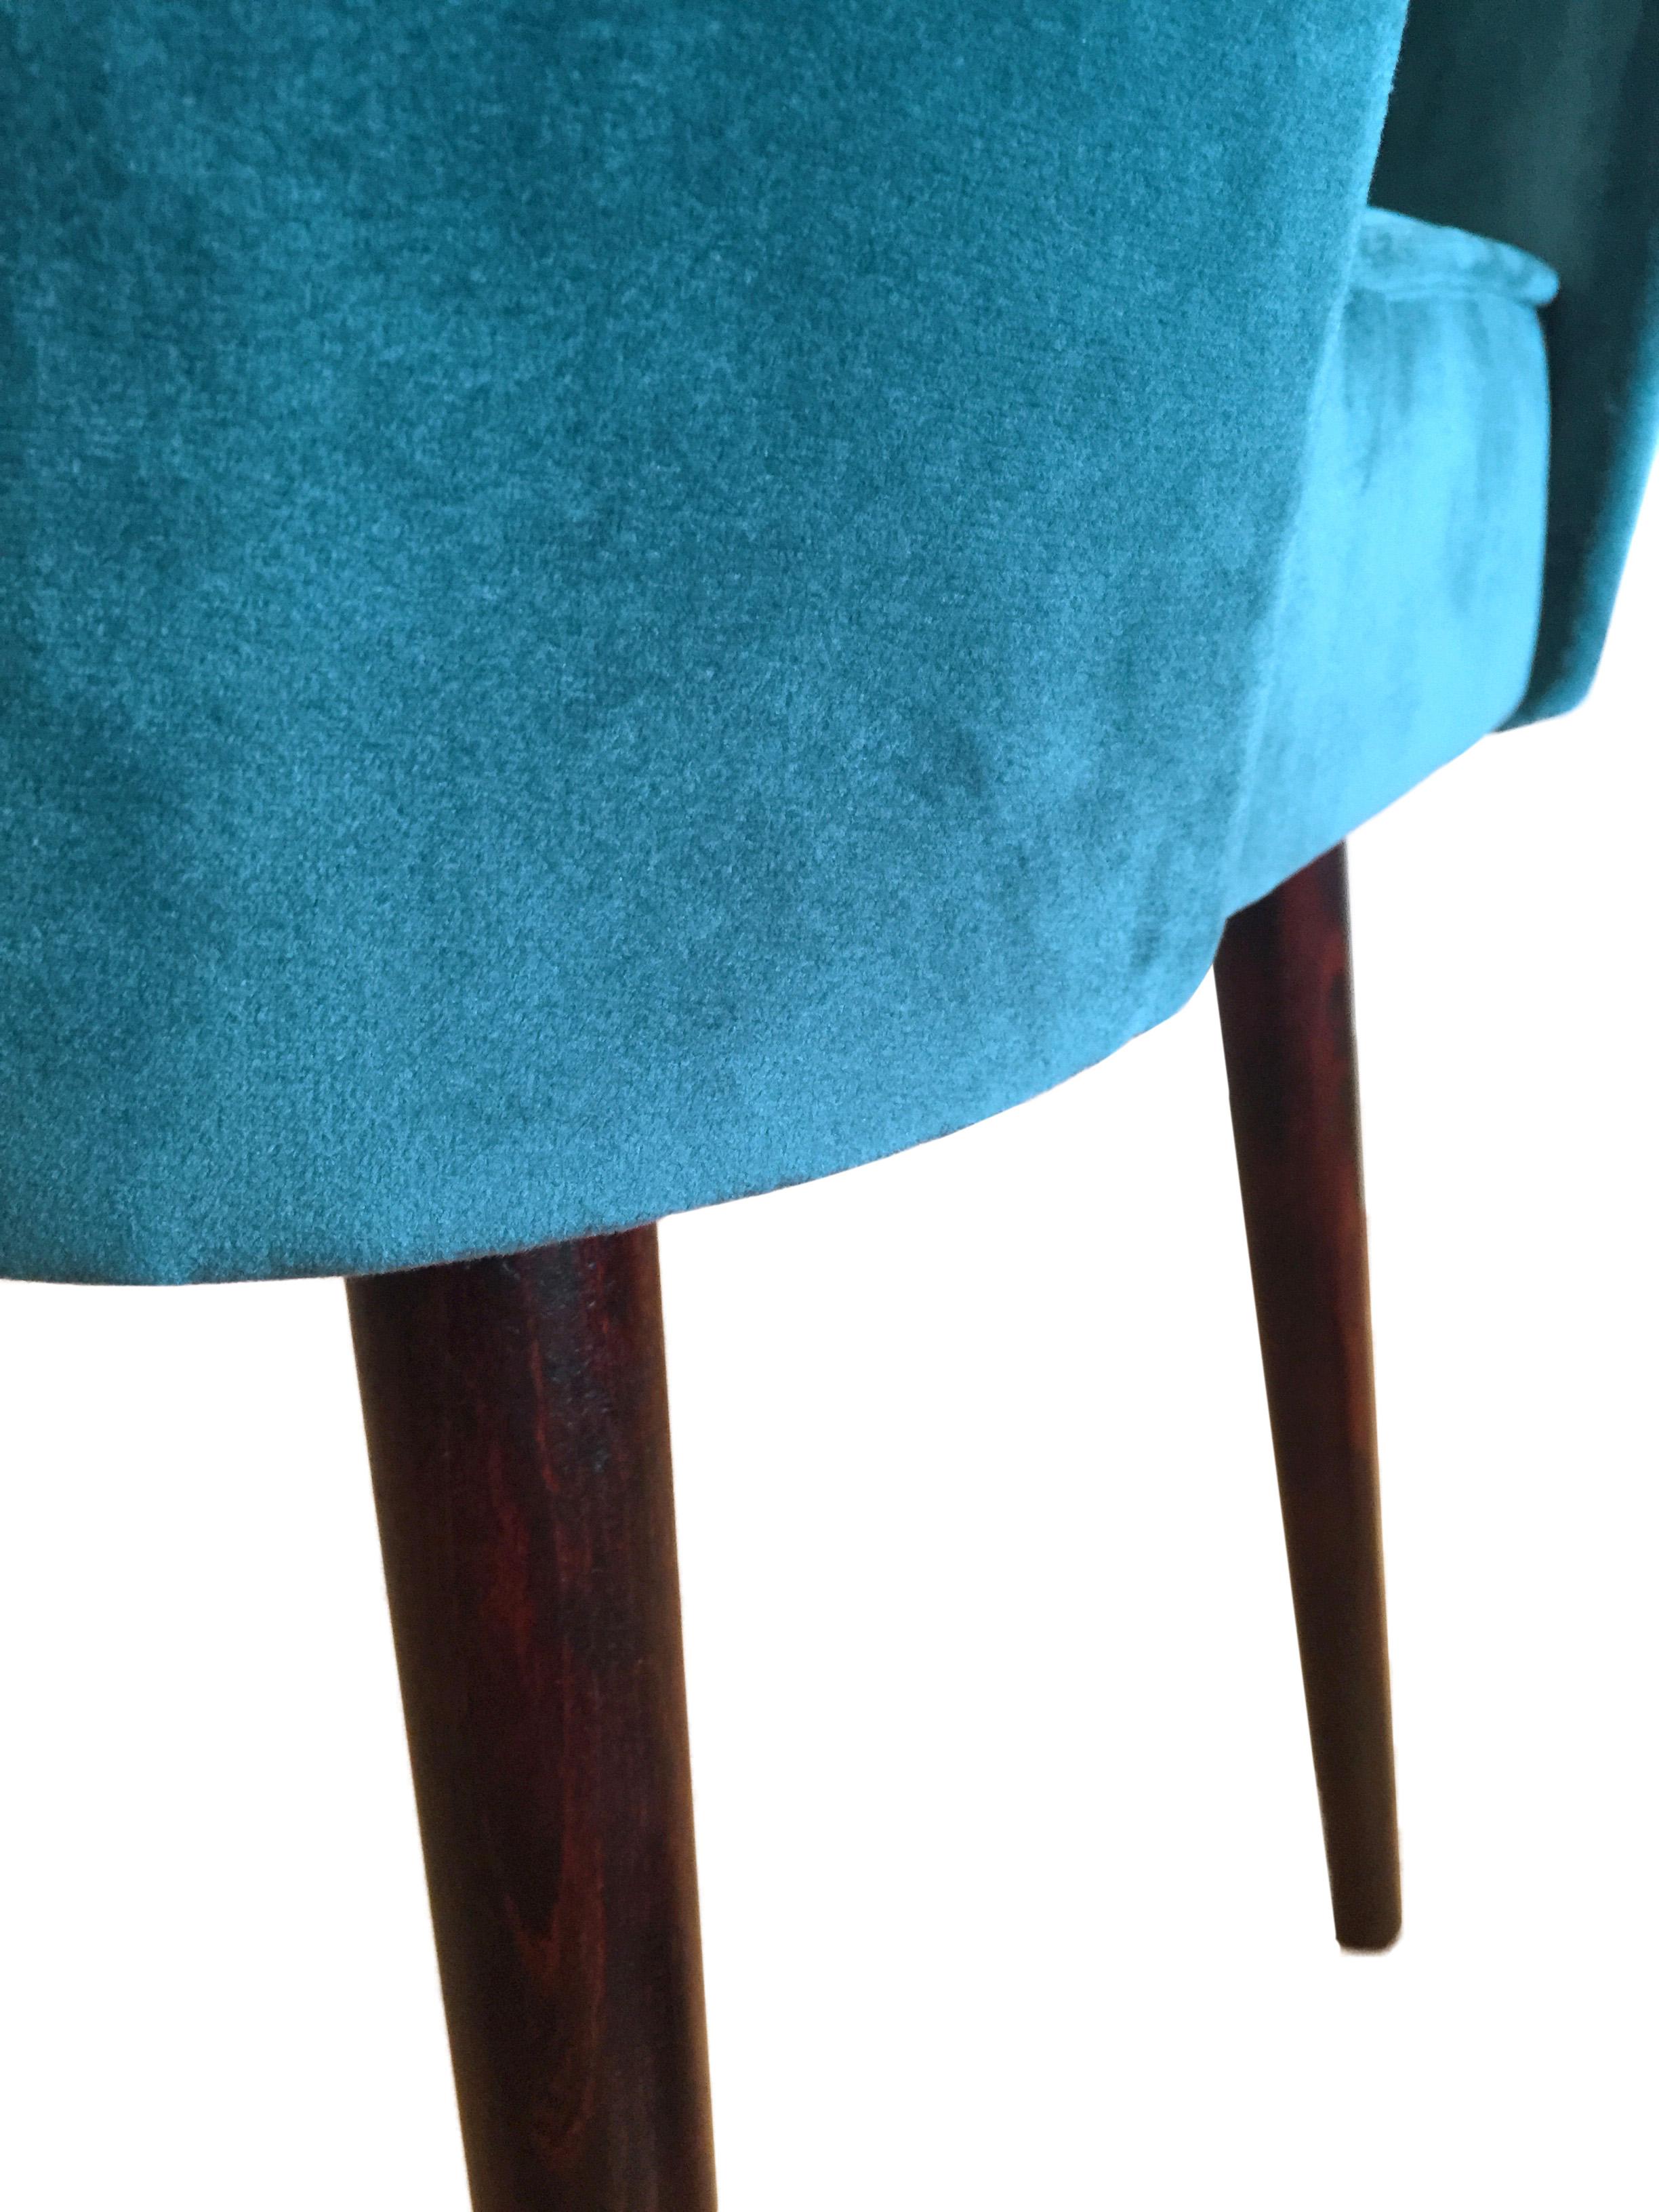 Hand-Crafted Mid-Century Chairs by Leśniewski in Green Velvet, 1960s, Set of 2 For Sale